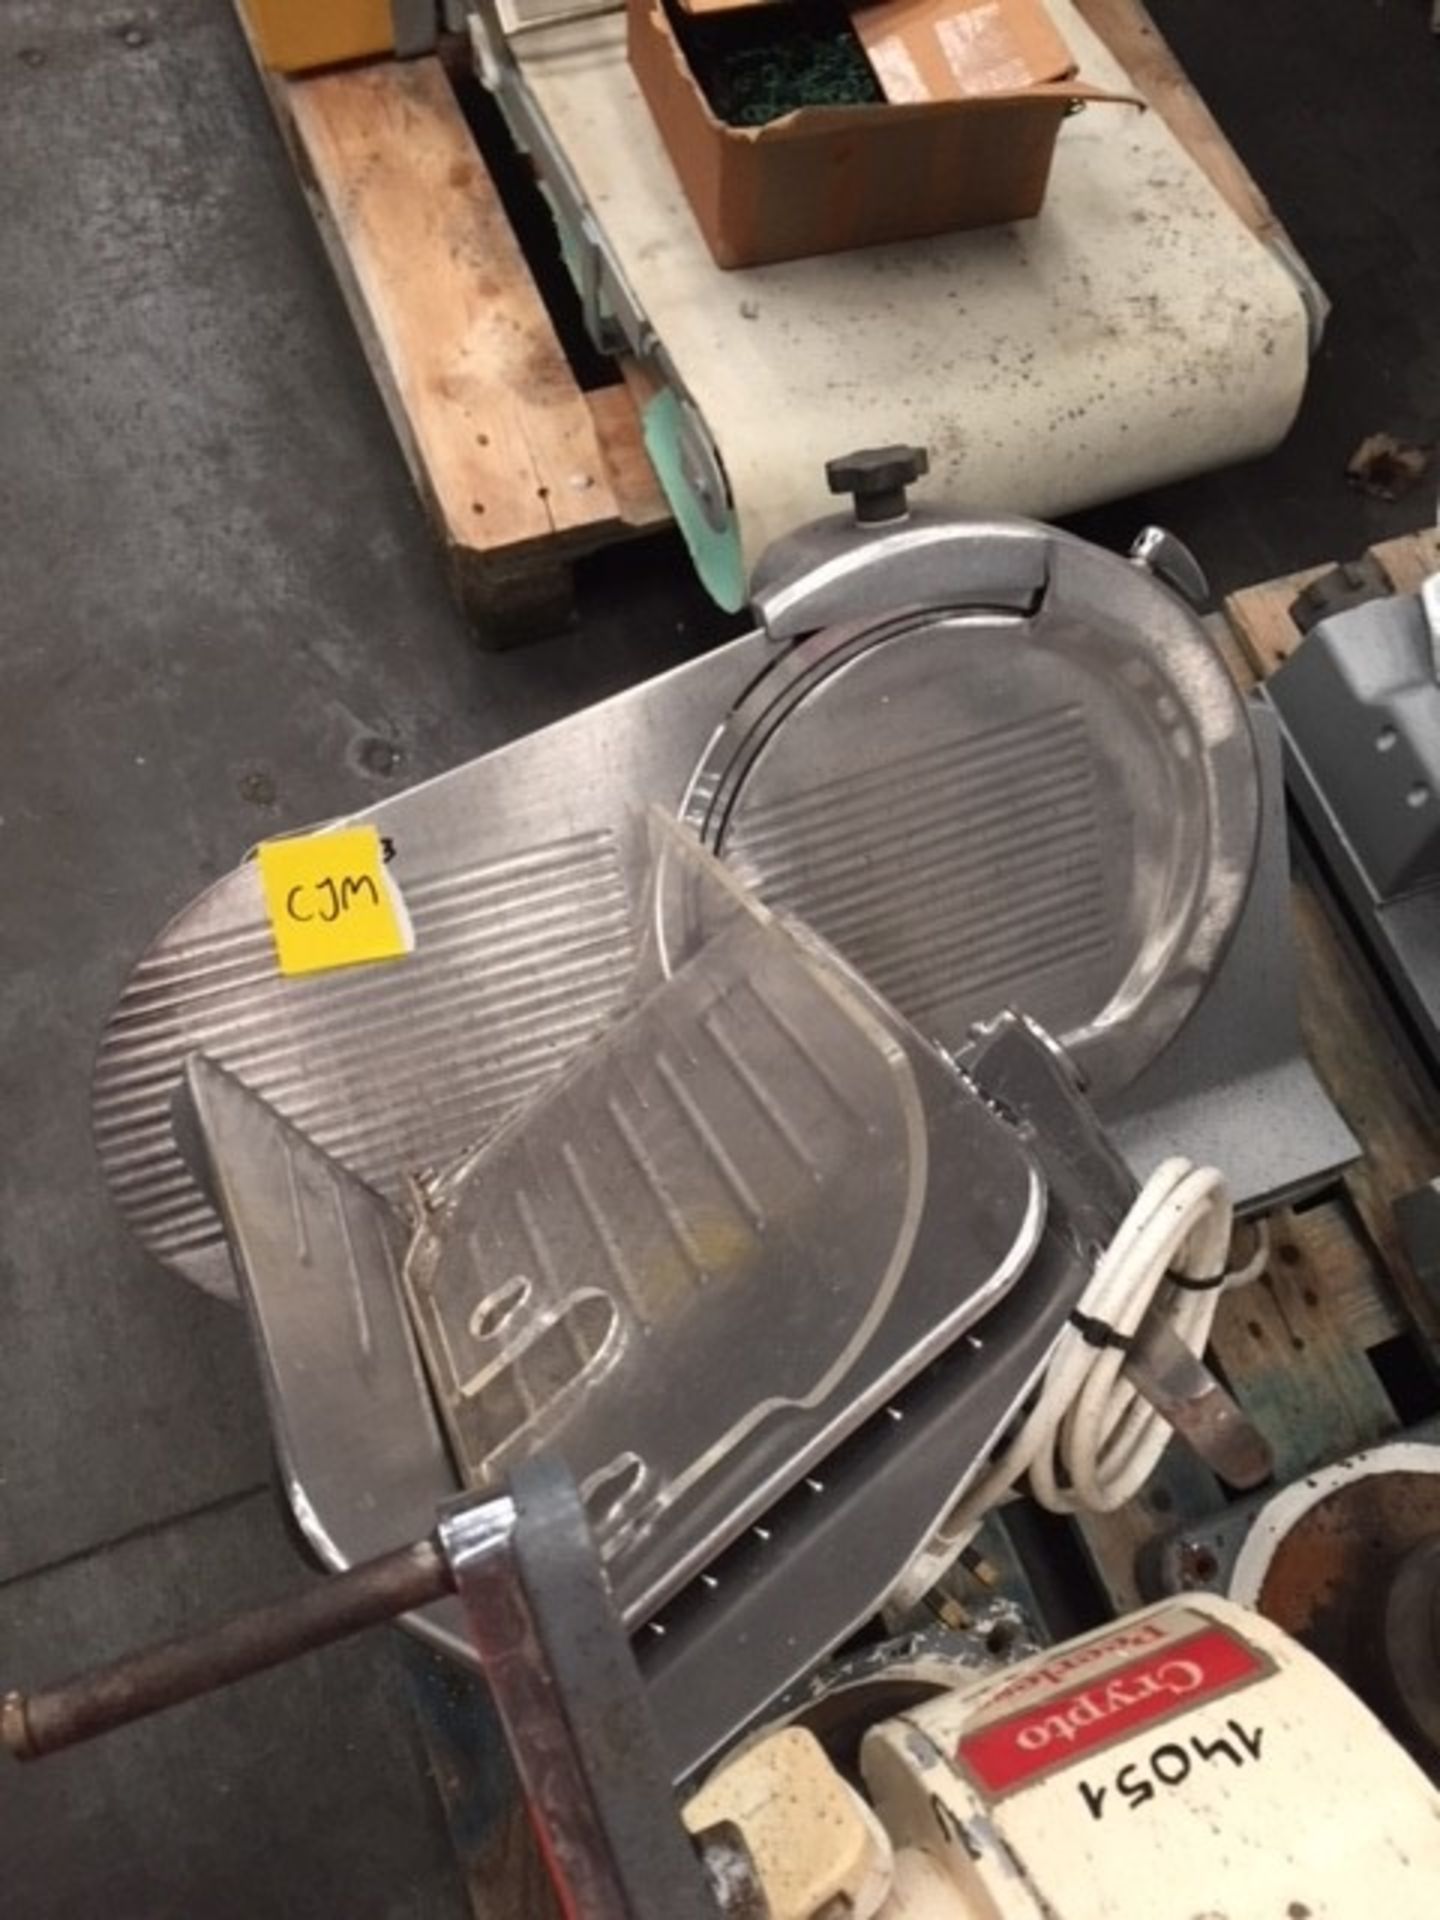 * Berkel slicer. Single phase. (OF Ref 11) Please note there is a £20 + VAT lift out fee on this